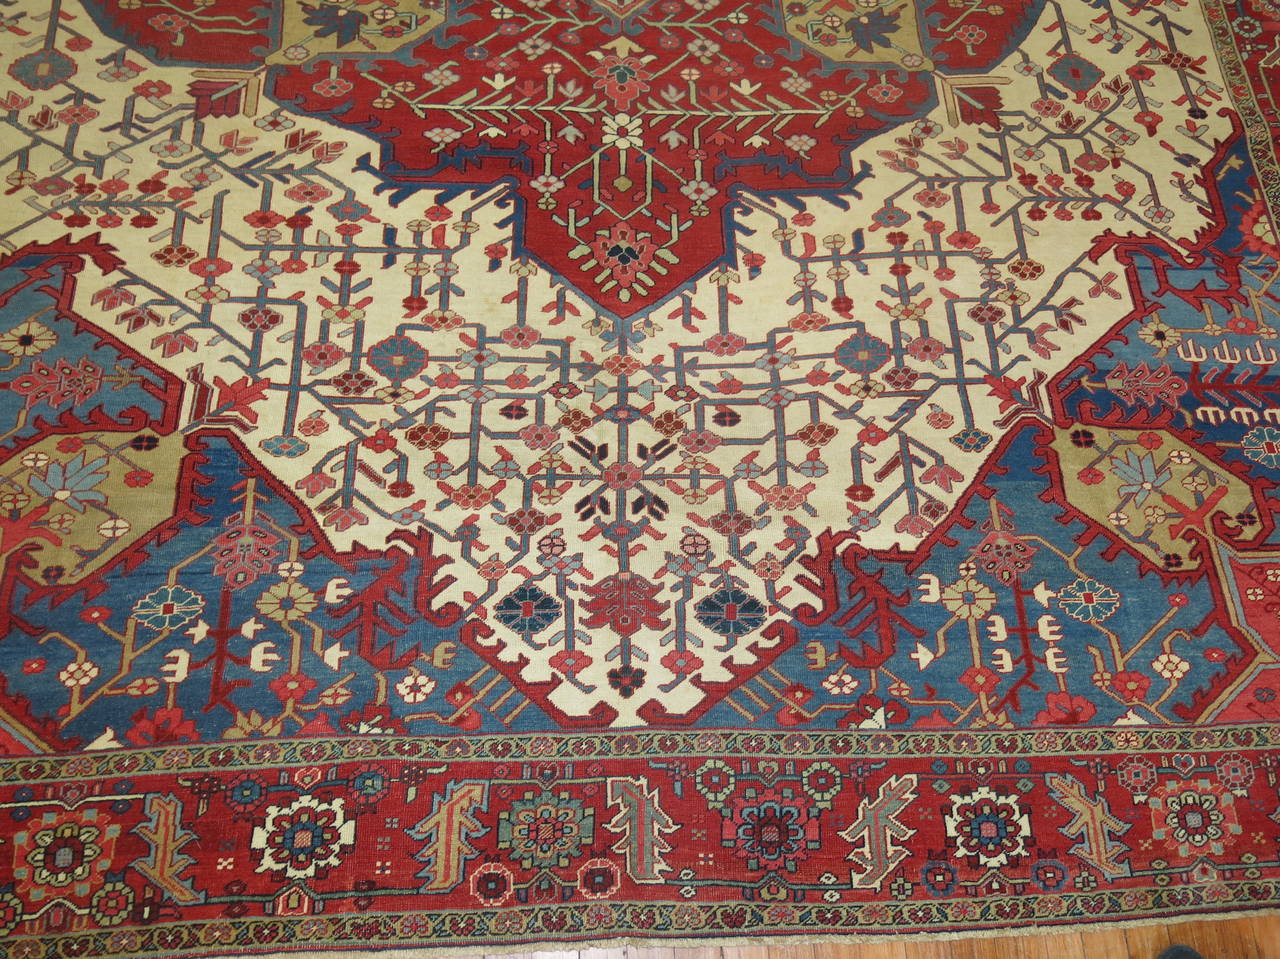 An exquisite late 19th century Persian Serapi rug.

Antique Serapi carpets were woven on the level of a family or small workshop with multiple weavers working several years to complete each Persian rug. The weaving was done almost exclusively by